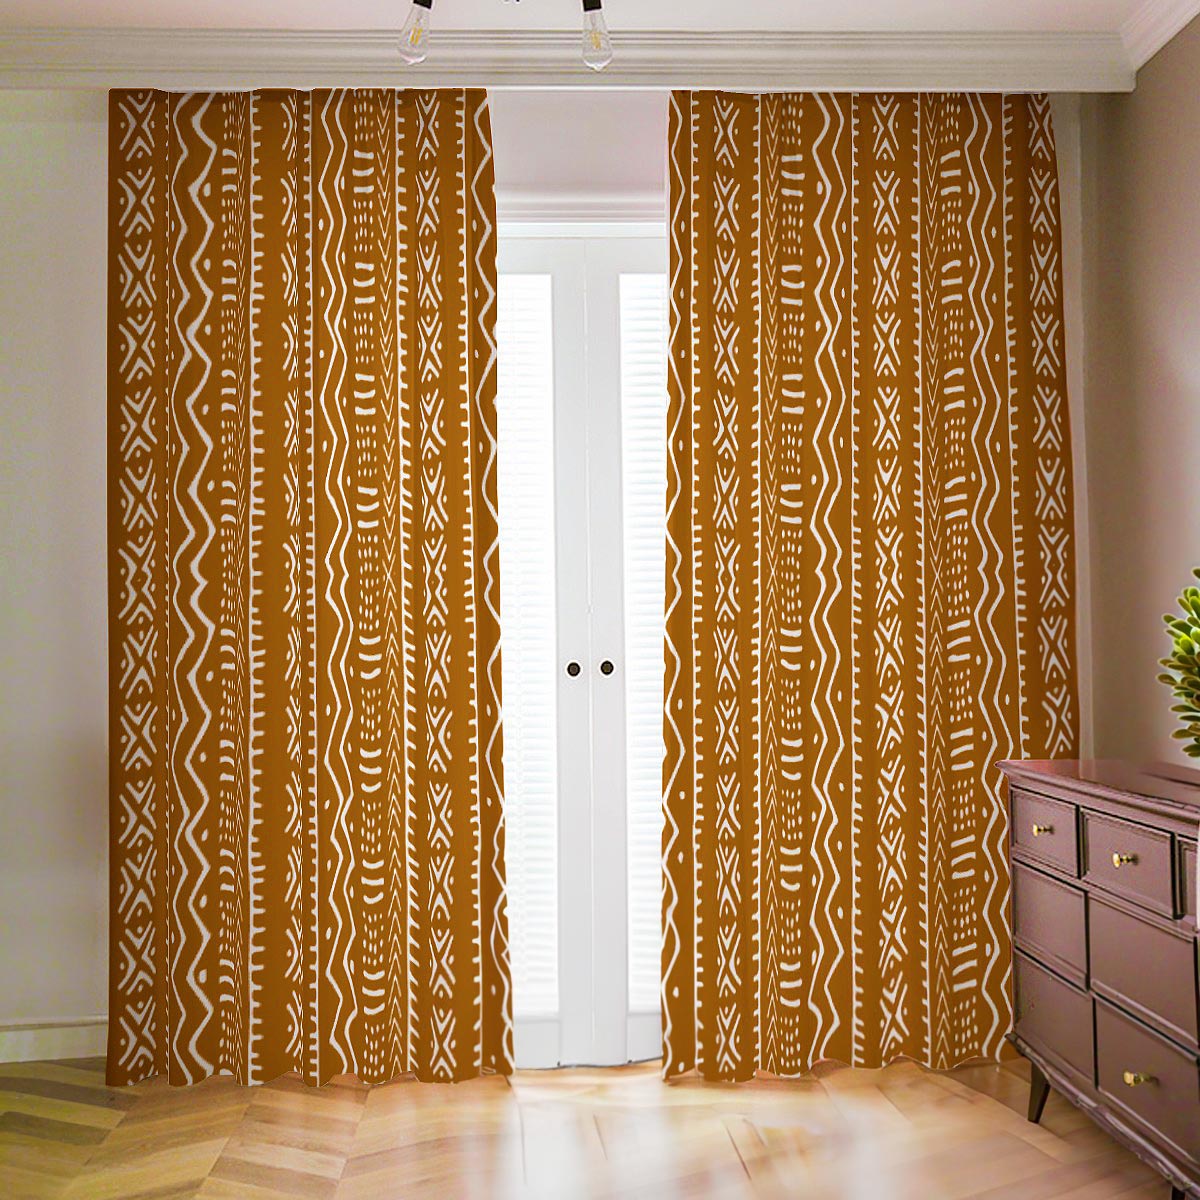 Orange Blackout Curtain in African Mudcloth Print - Bynelo